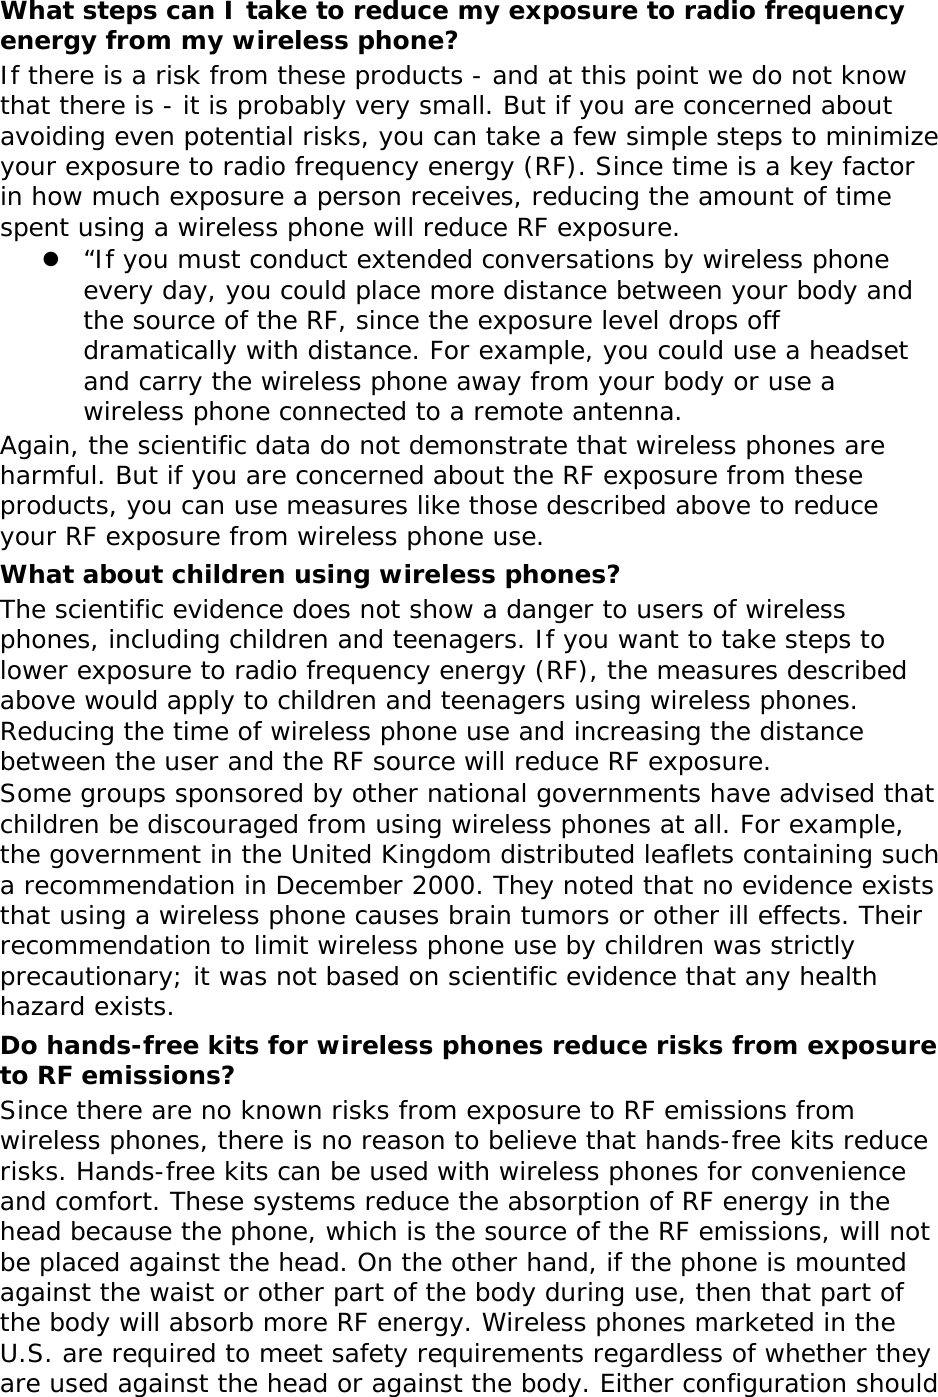 What steps can I take to reduce my exposure to radio frequency energy from my wireless phone? If there is a risk from these products - and at this point we do not know that there is - it is probably very small. But if you are concerned about avoiding even potential risks, you can take a few simple steps to minimize your exposure to radio frequency energy (RF). Since time is a key factor in how much exposure a person receives, reducing the amount of time spent using a wireless phone will reduce RF exposure.  “If you must conduct extended conversations by wireless phone every day, you could place more distance between your body and the source of the RF, since the exposure level drops off dramatically with distance. For example, you could use a headset and carry the wireless phone away from your body or use a wireless phone connected to a remote antenna. Again, the scientific data do not demonstrate that wireless phones are harmful. But if you are concerned about the RF exposure from these products, you can use measures like those described above to reduce your RF exposure from wireless phone use. What about children using wireless phones? The scientific evidence does not show a danger to users of wireless phones, including children and teenagers. If you want to take steps to lower exposure to radio frequency energy (RF), the measures described above would apply to children and teenagers using wireless phones. Reducing the time of wireless phone use and increasing the distance between the user and the RF source will reduce RF exposure. Some groups sponsored by other national governments have advised that children be discouraged from using wireless phones at all. For example, the government in the United Kingdom distributed leaflets containing such a recommendation in December 2000. They noted that no evidence exists that using a wireless phone causes brain tumors or other ill effects. Their recommendation to limit wireless phone use by children was strictly precautionary; it was not based on scientific evidence that any health hazard exists.  Do hands-free kits for wireless phones reduce risks from exposure to RF emissions? Since there are no known risks from exposure to RF emissions from wireless phones, there is no reason to believe that hands-free kits reduce risks. Hands-free kits can be used with wireless phones for convenience and comfort. These systems reduce the absorption of RF energy in the head because the phone, which is the source of the RF emissions, will not be placed against the head. On the other hand, if the phone is mounted against the waist or other part of the body during use, then that part of the body will absorb more RF energy. Wireless phones marketed in the U.S. are required to meet safety requirements regardless of whether they are used against the head or against the body. Either configuration should 